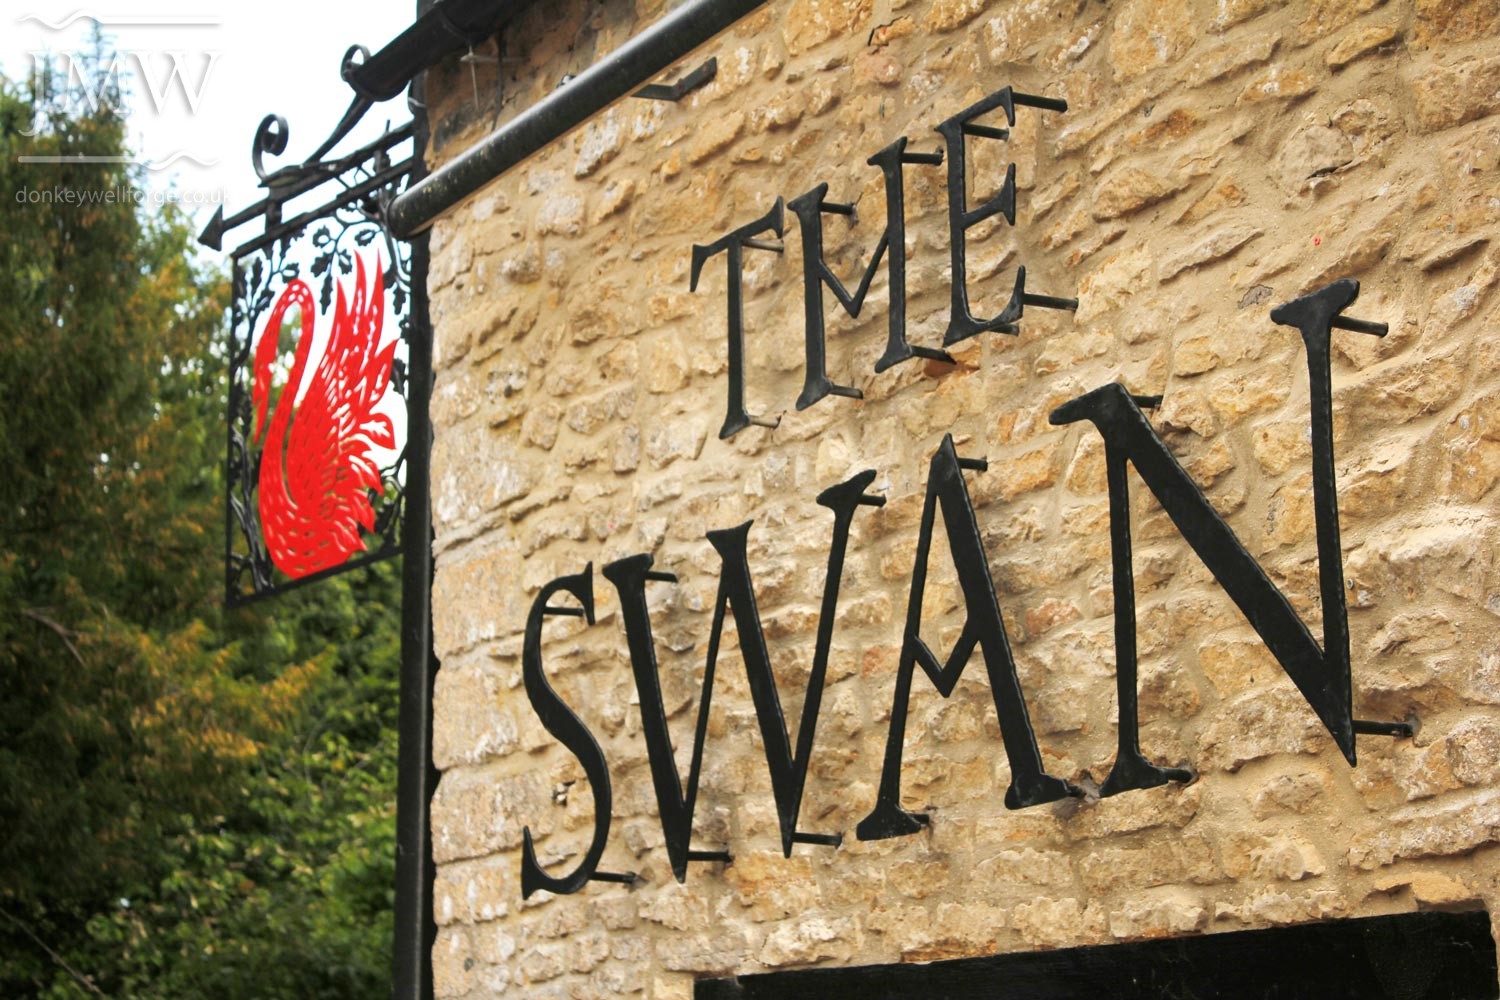 The Swan Inn, Hanging pub Sign and Sign Lettering.